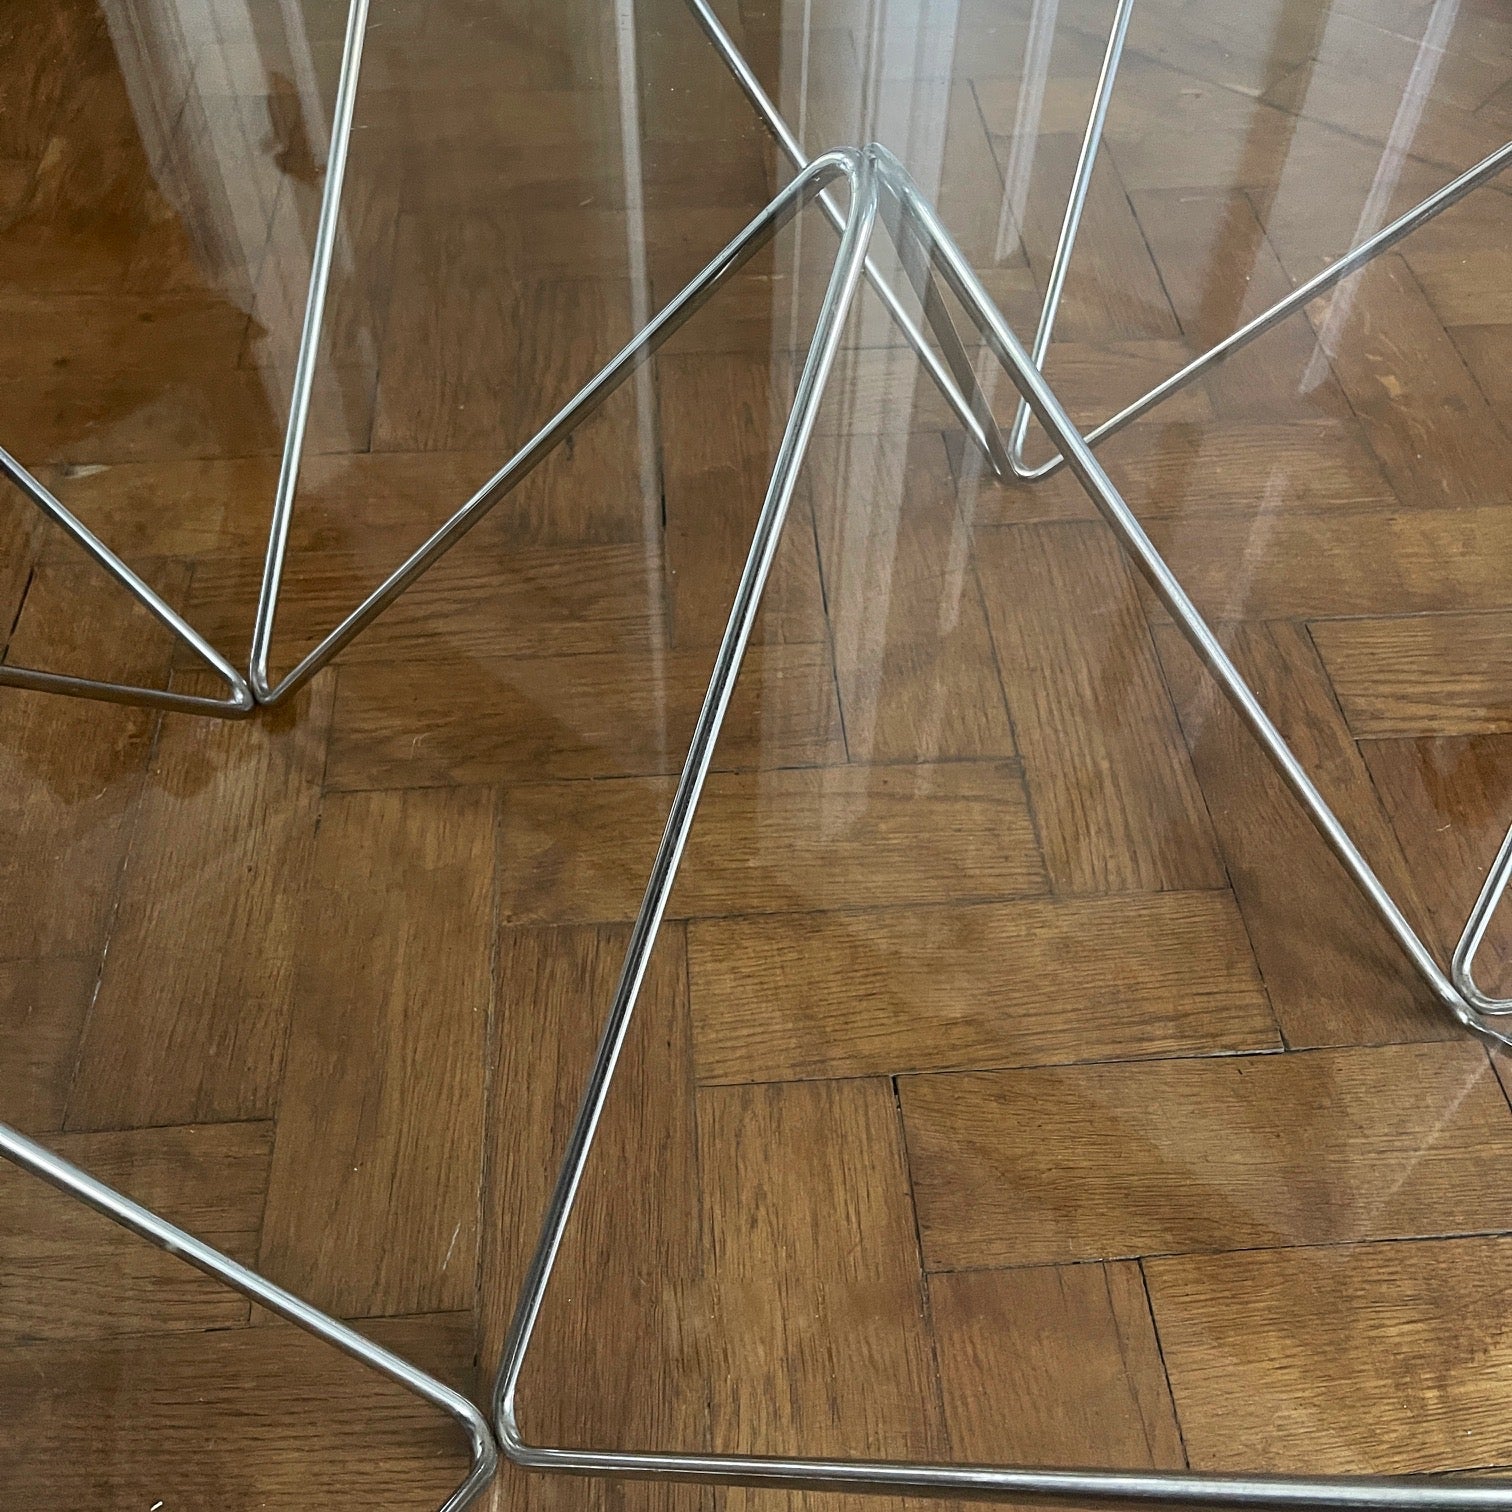 A stylish modernistic chromed square vintage coffee table in the Style of Paolo Piva circa 1980, Italy.Simple and elegant in form, the frame is made of chromed steel shaped connected triangles. Clear glass top - SHOP NOW - www.intovintage.co.uk